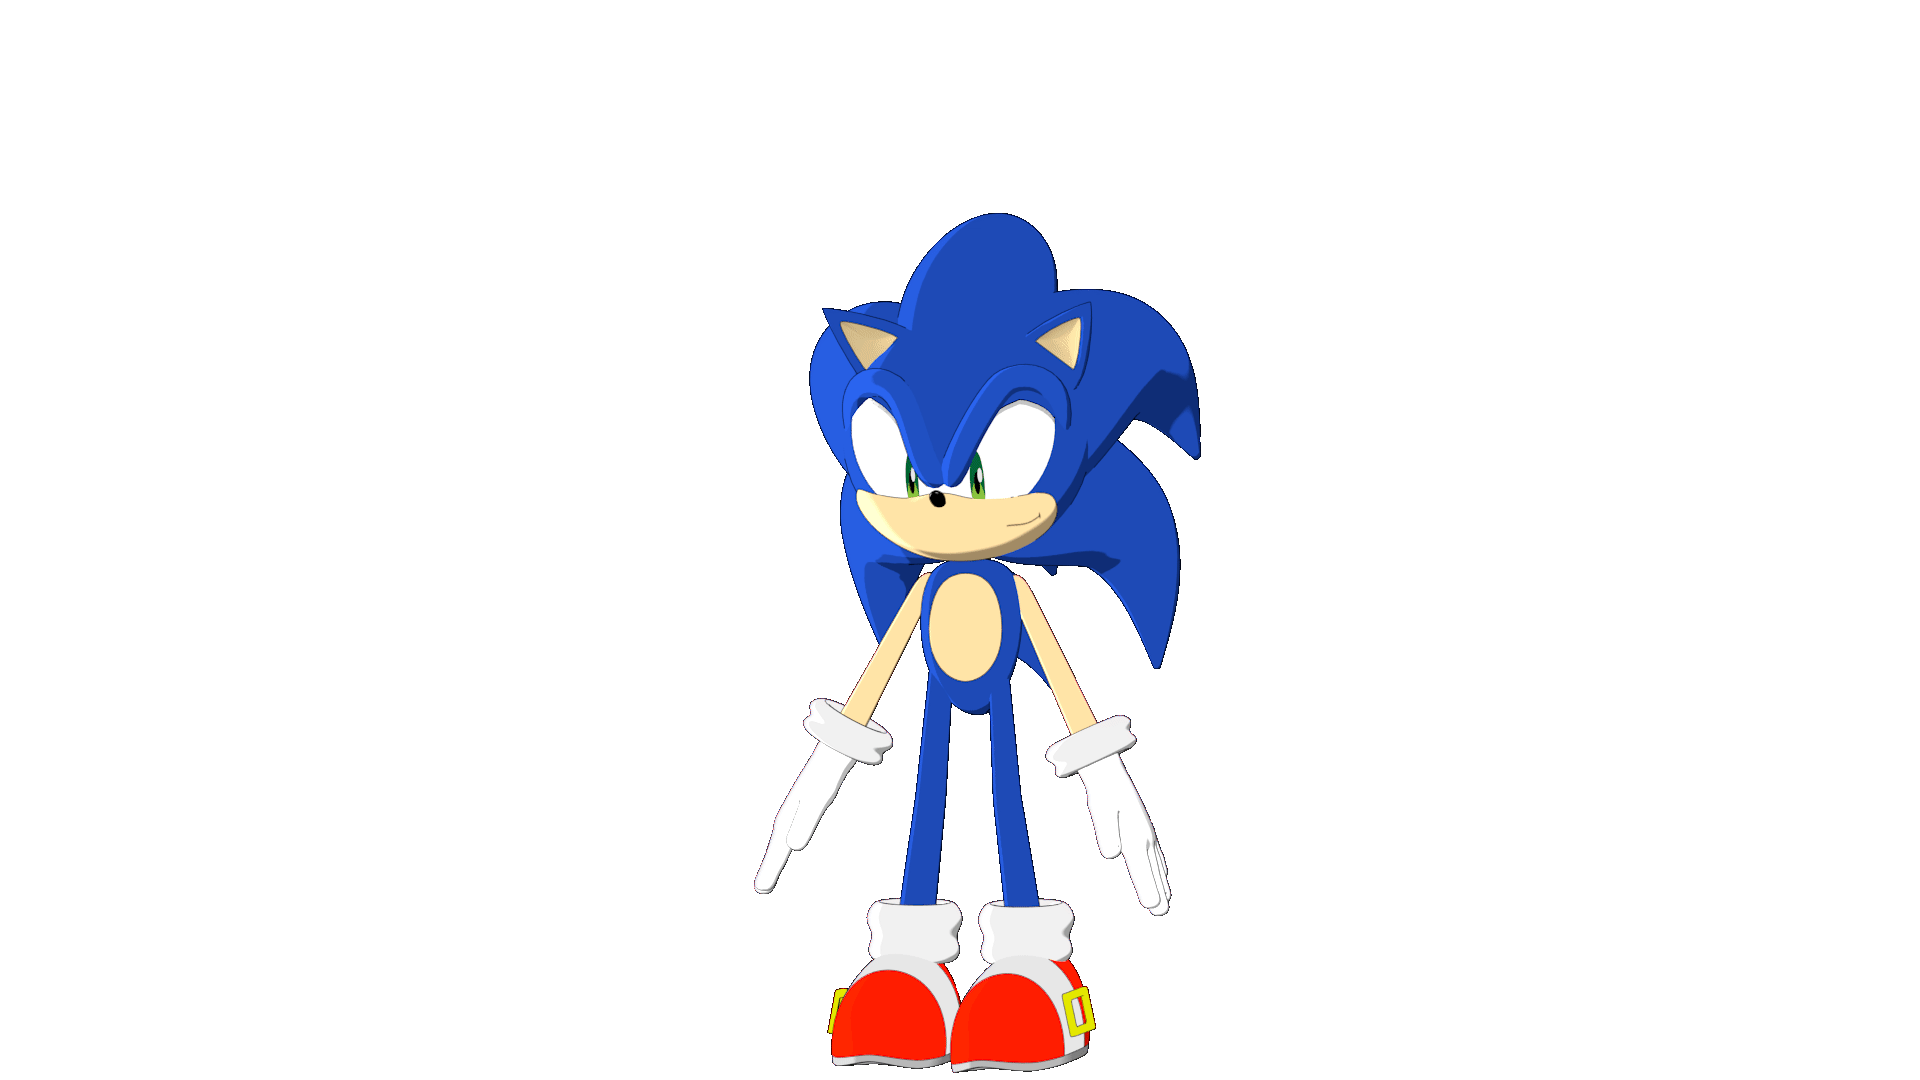 Sonic X Model: Shadow by TheJudgeX on DeviantArt